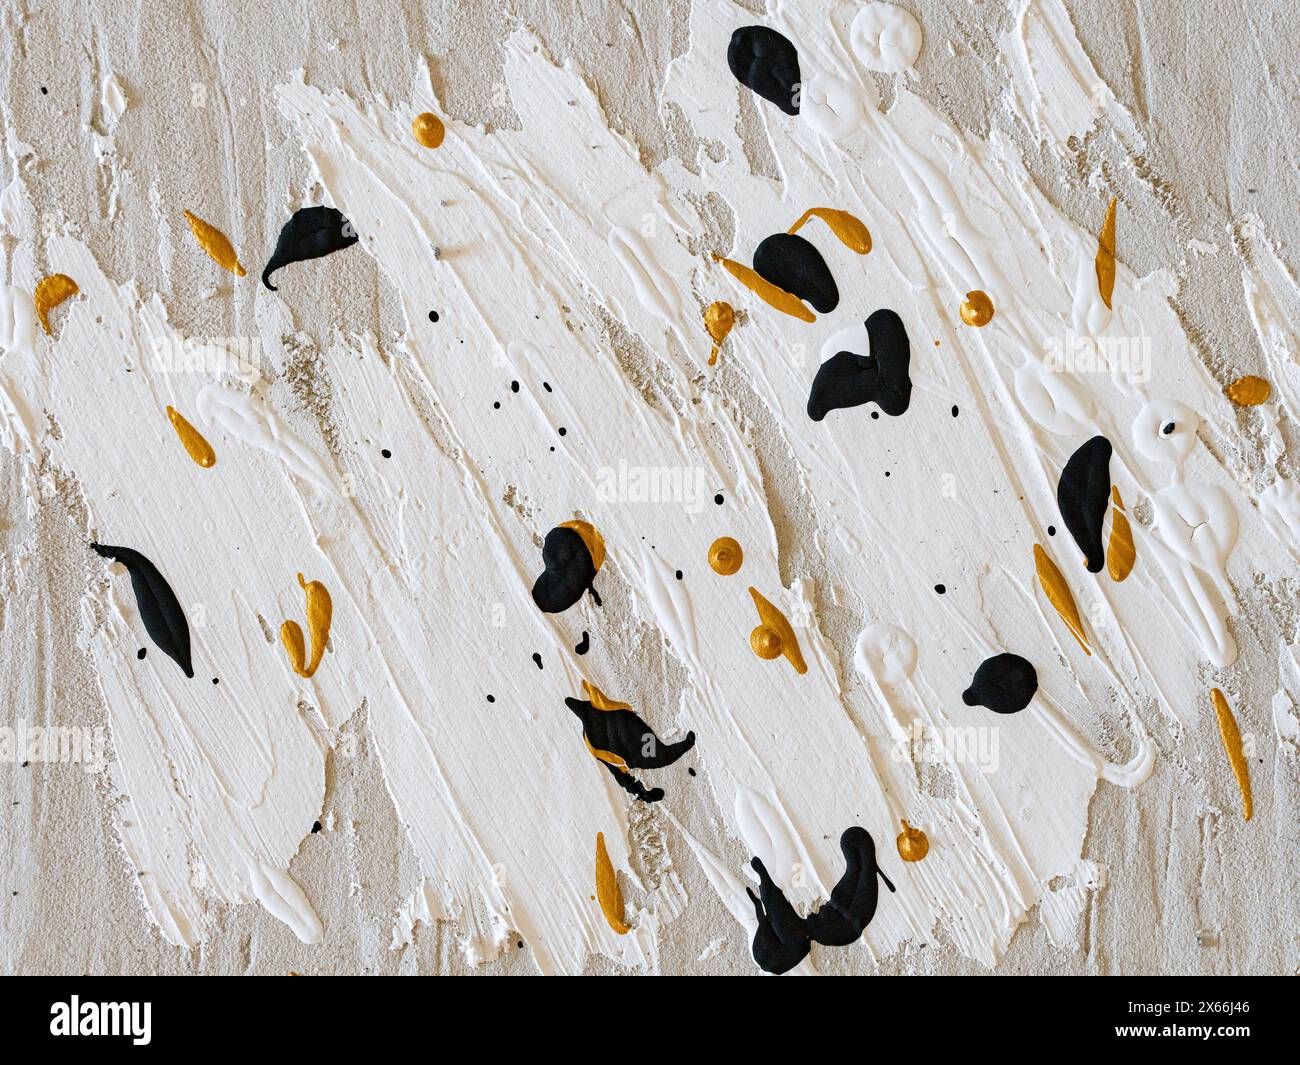 Painted background image with brush strokes and structure paste on a canvas. Random texture with black and golden spots. Abstract creative design. Stock Photo